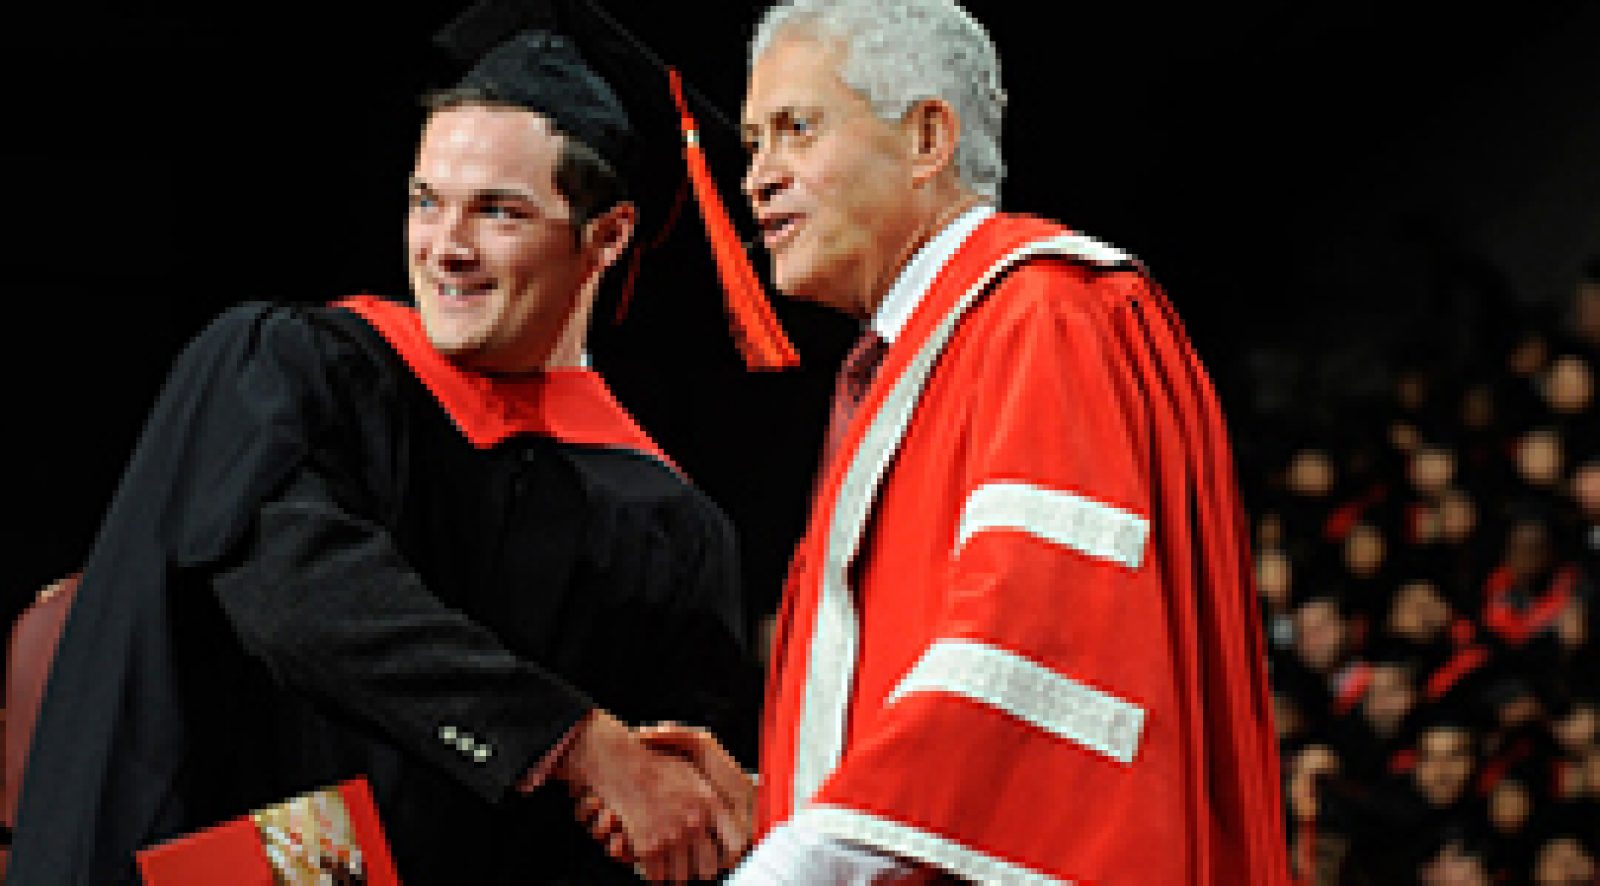 York U's President Mamdouh Shoukri shaking hands with a student during convocation